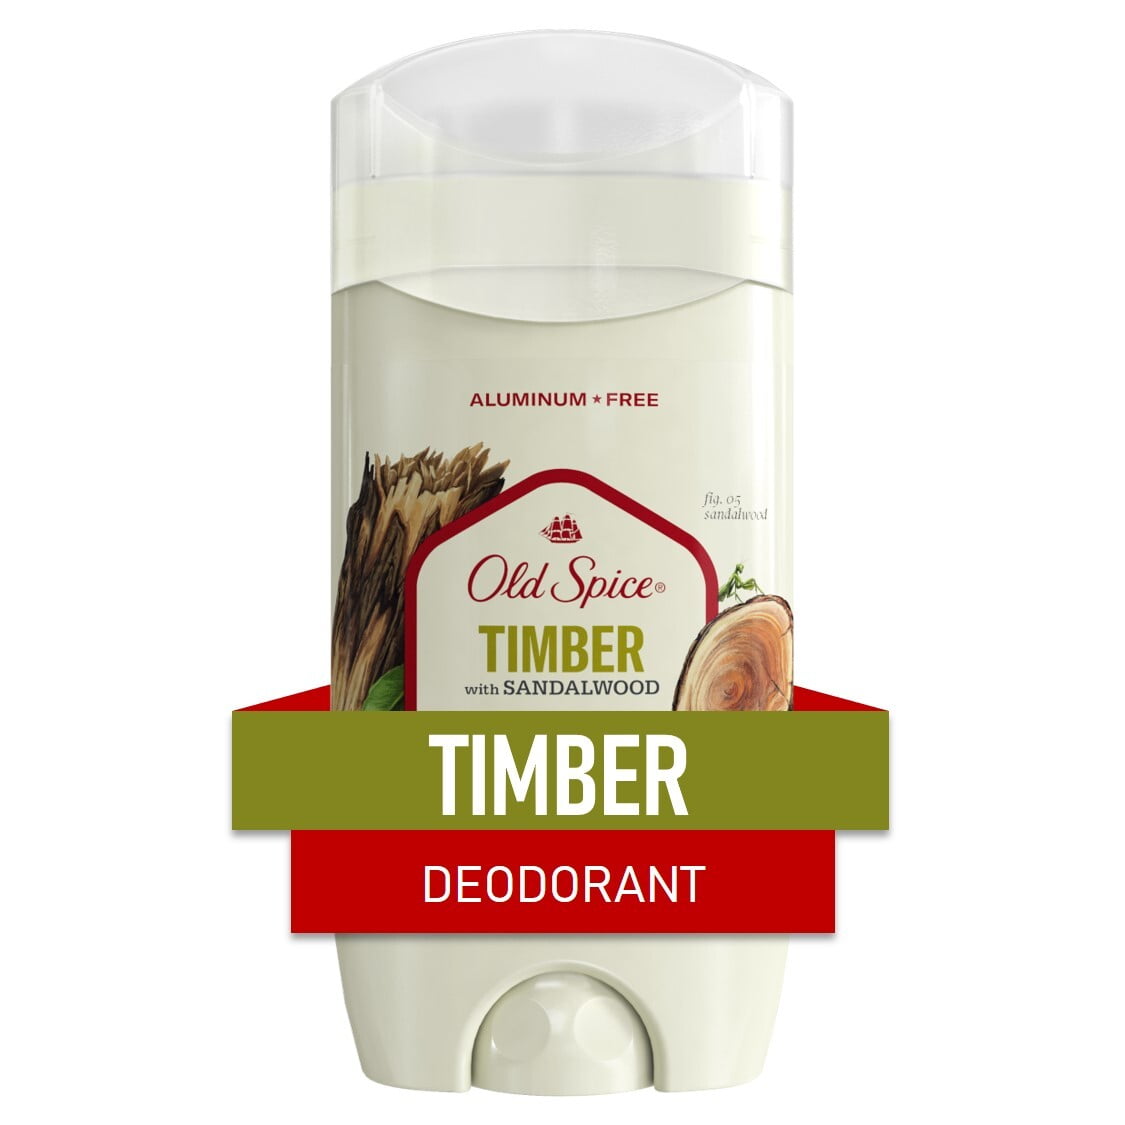 Old Spice Deodorant for Men Timber with Sandalwood Scent, 3 oz